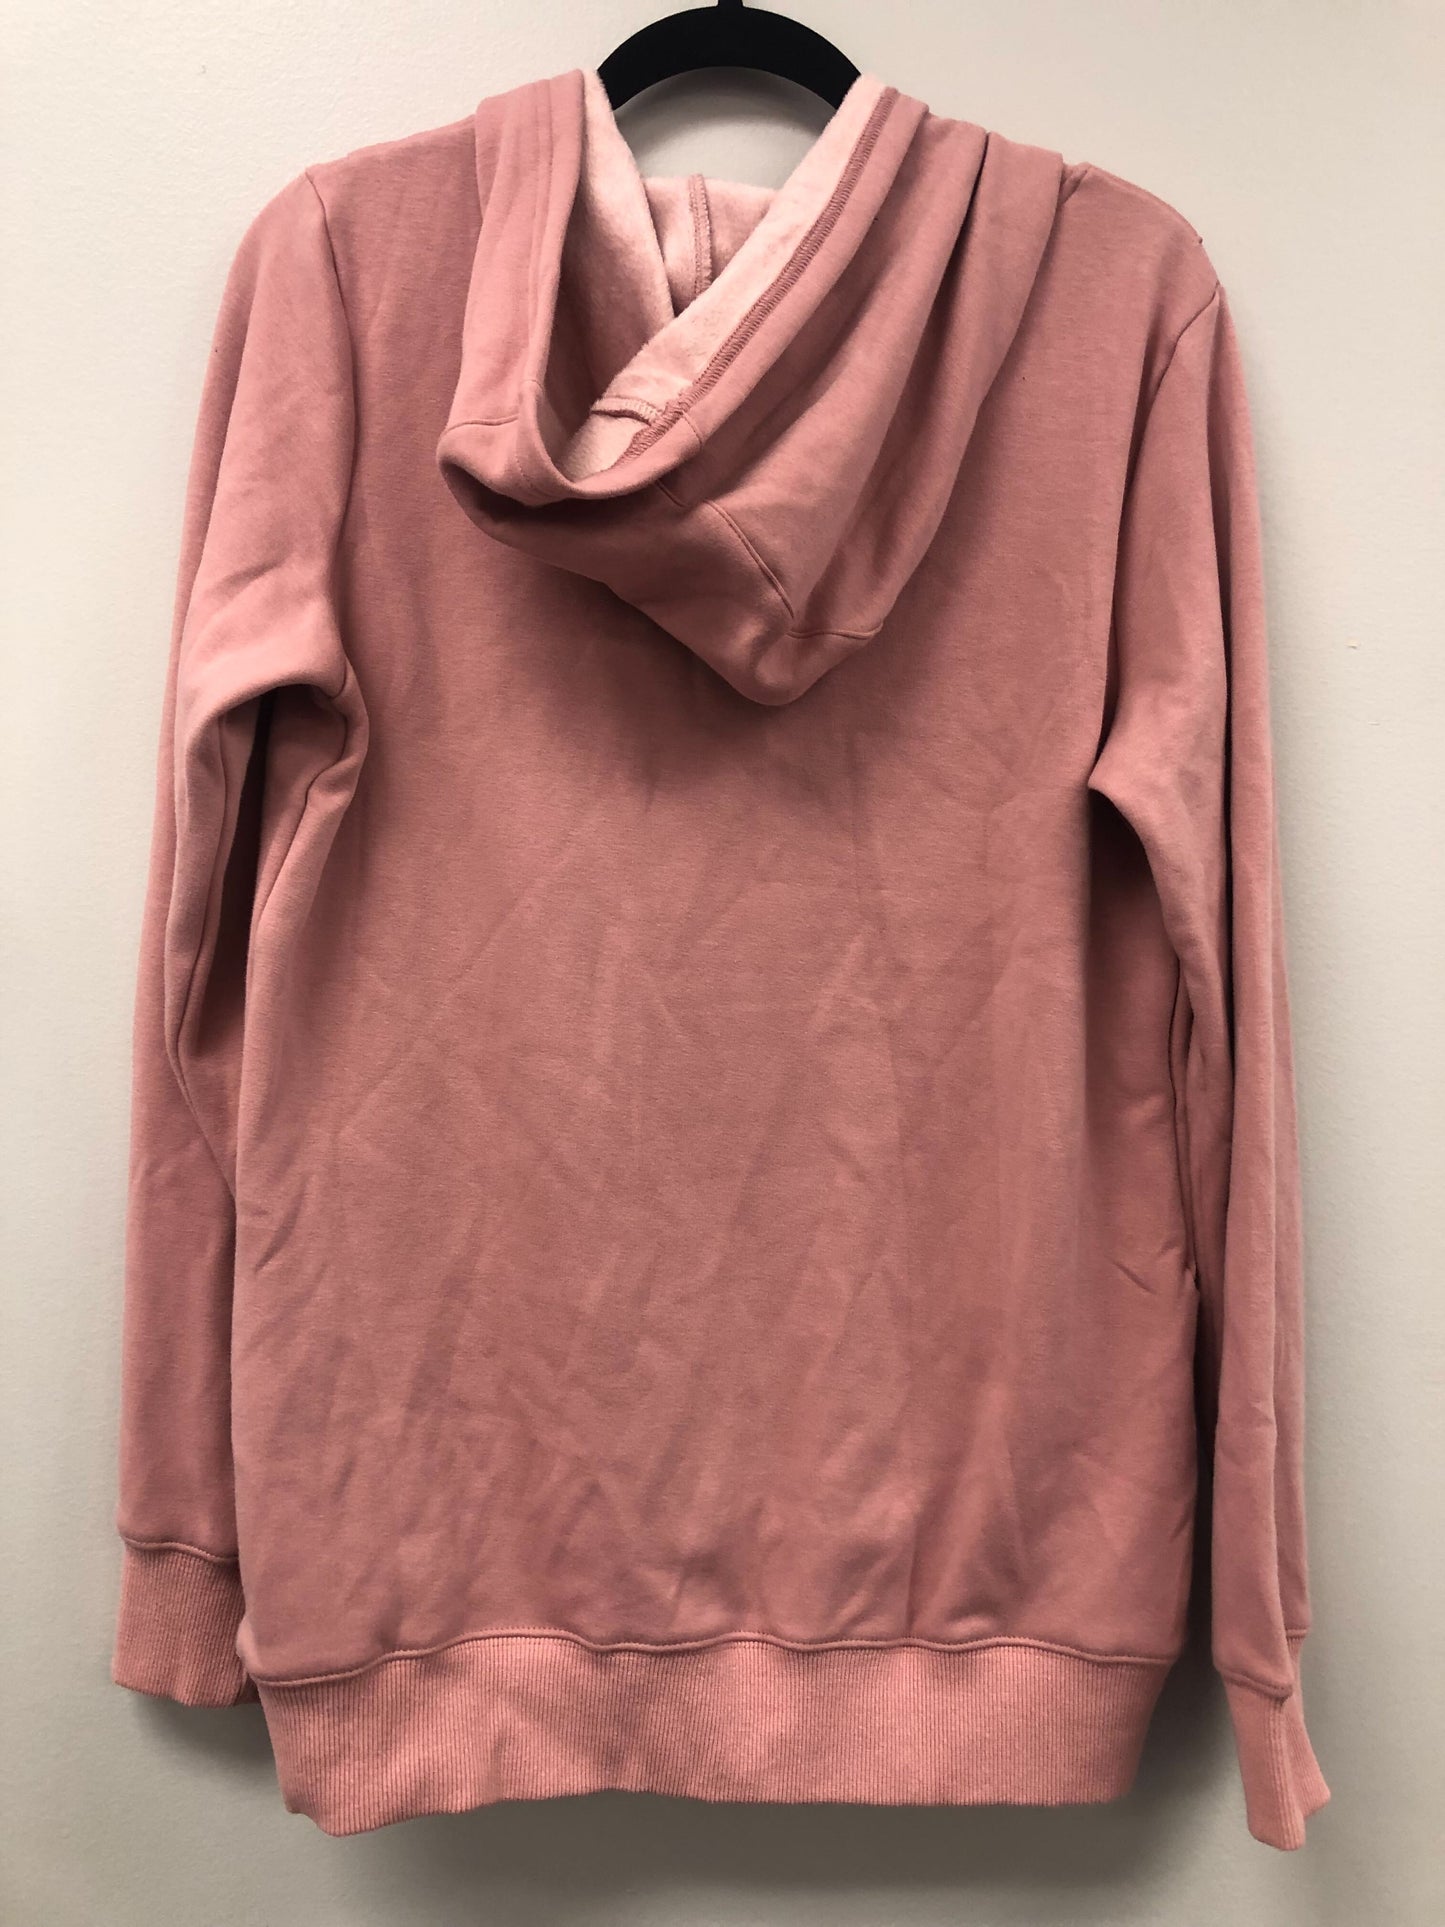 Outlet 5512 - The Latched Mama Heavy Hoodie - Rose Blush - Medium